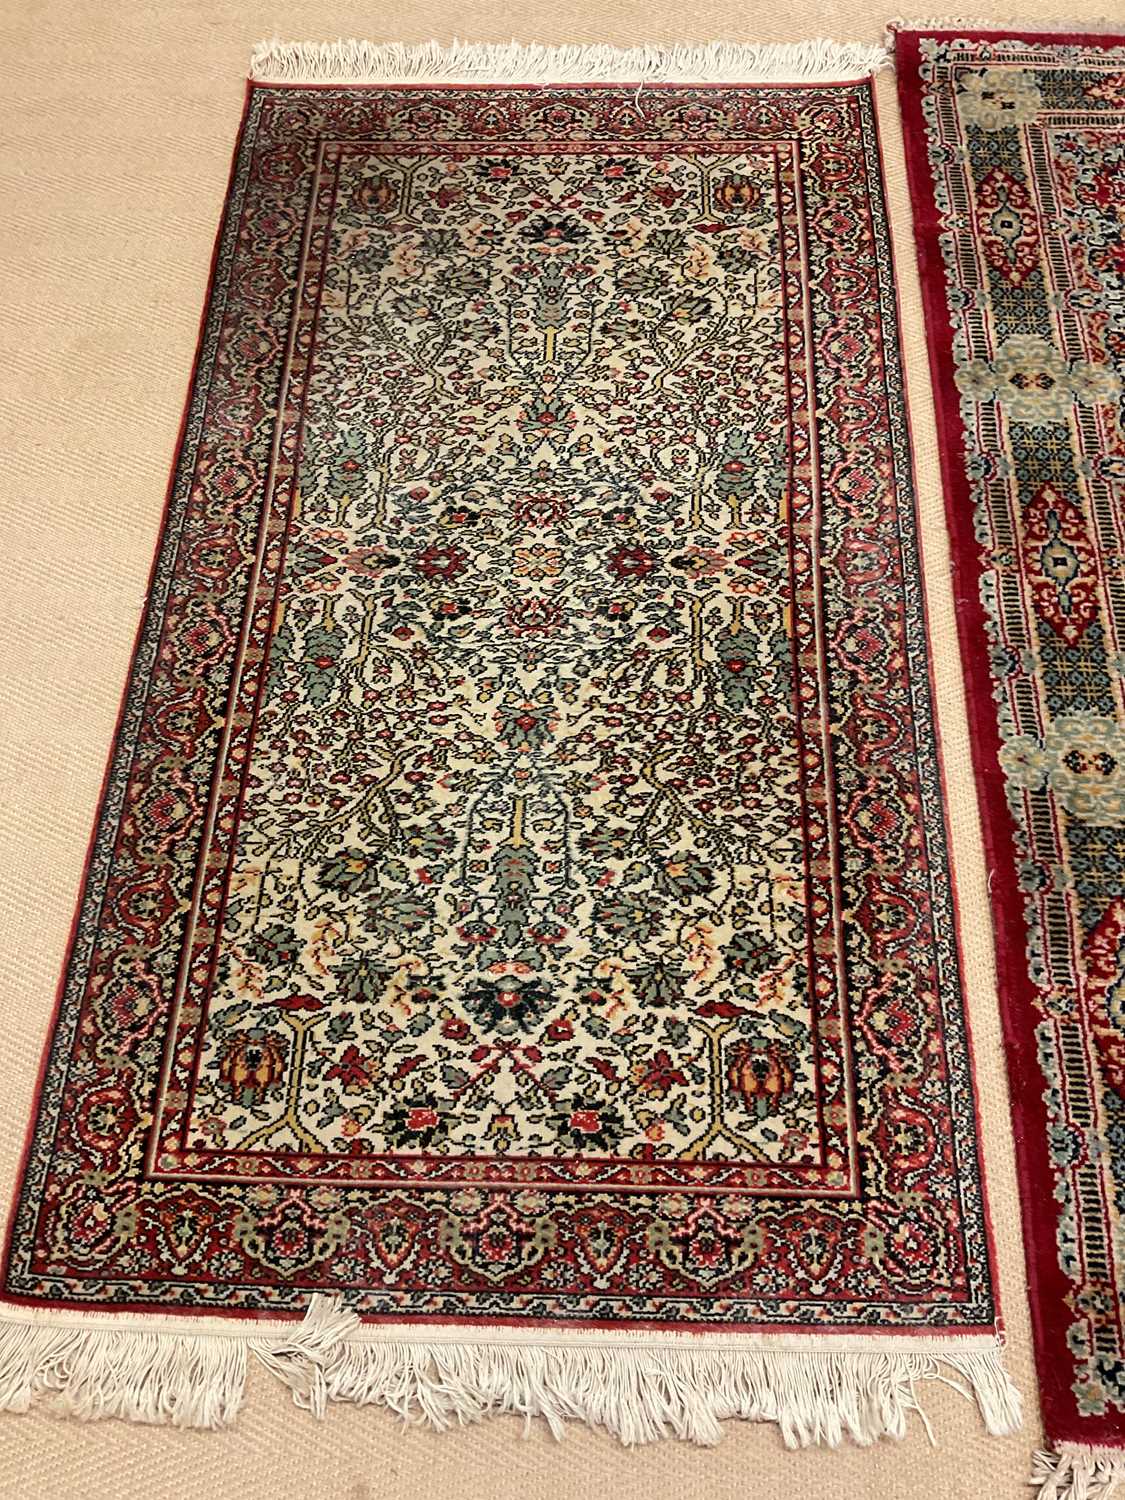 Two vintage Eastern rugs, one a dark red rug with central medallion and decorative border, 122 x - Bild 2 aus 6